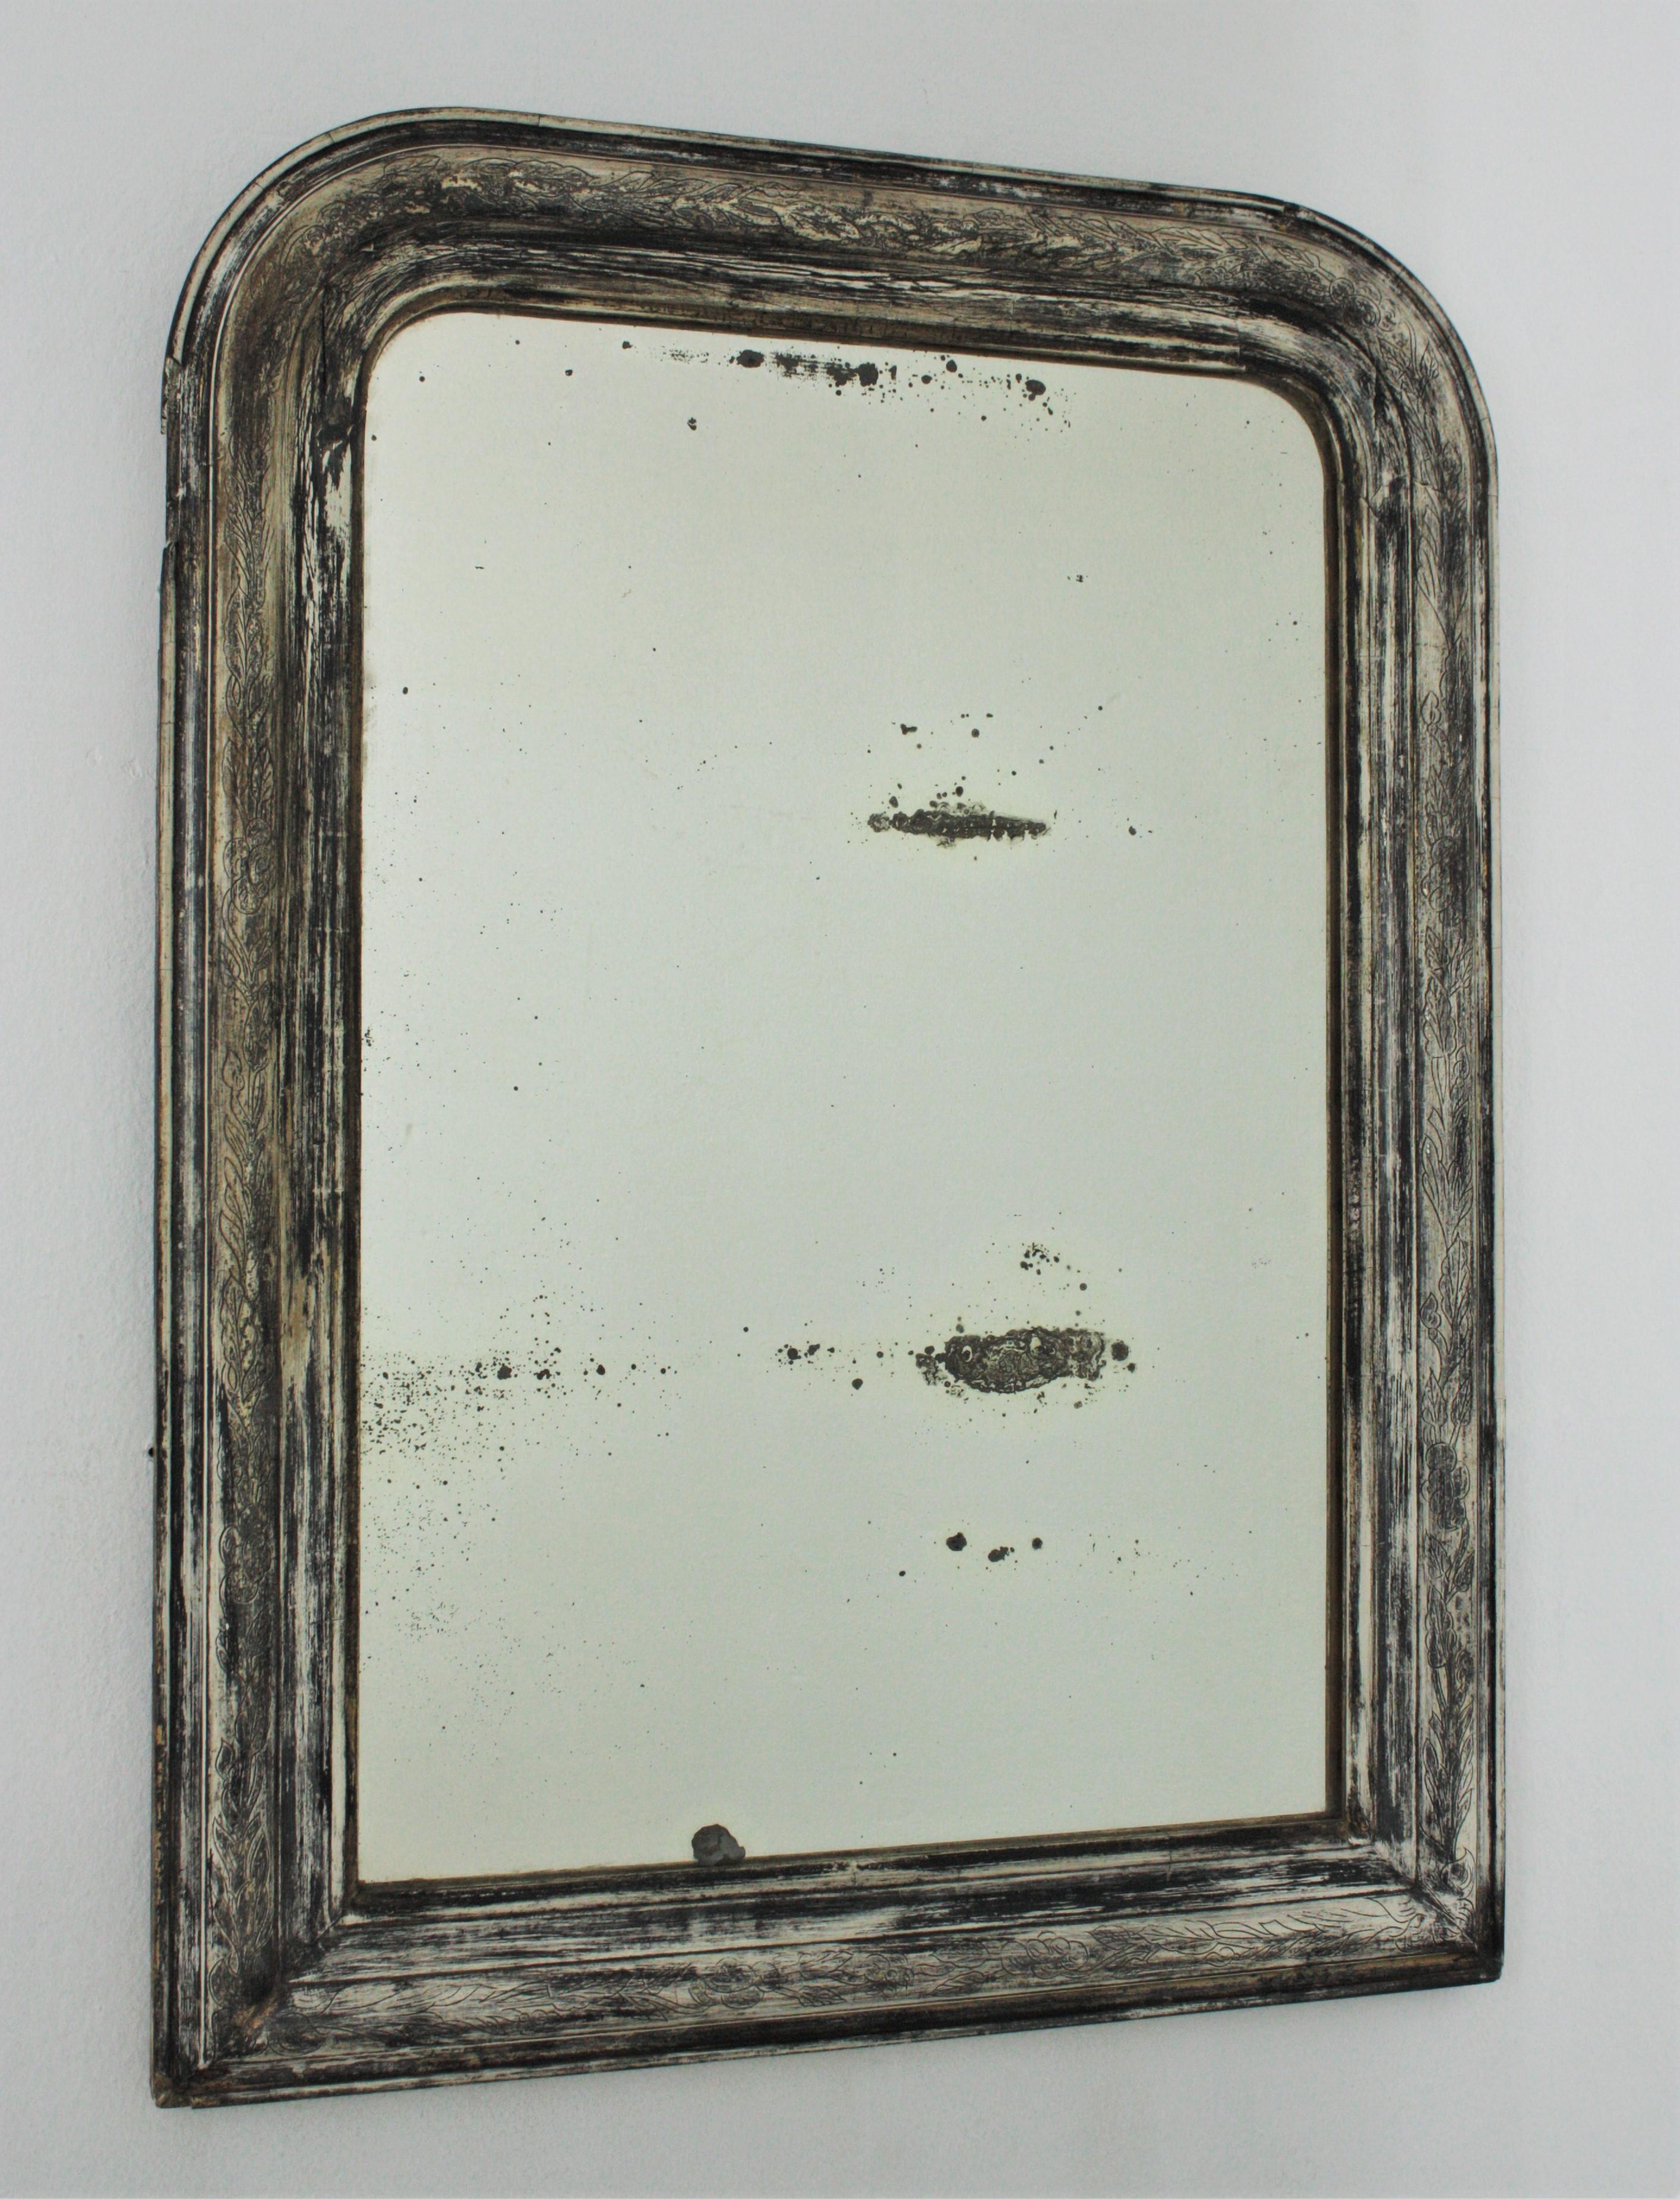 French 19th century Louis Philippe mirror in grey and white patina with silver leaf accents.
This antique mirror has a beautiful frame with engraved flower details and an interesting patina in grey and white colours retaining rests of silver